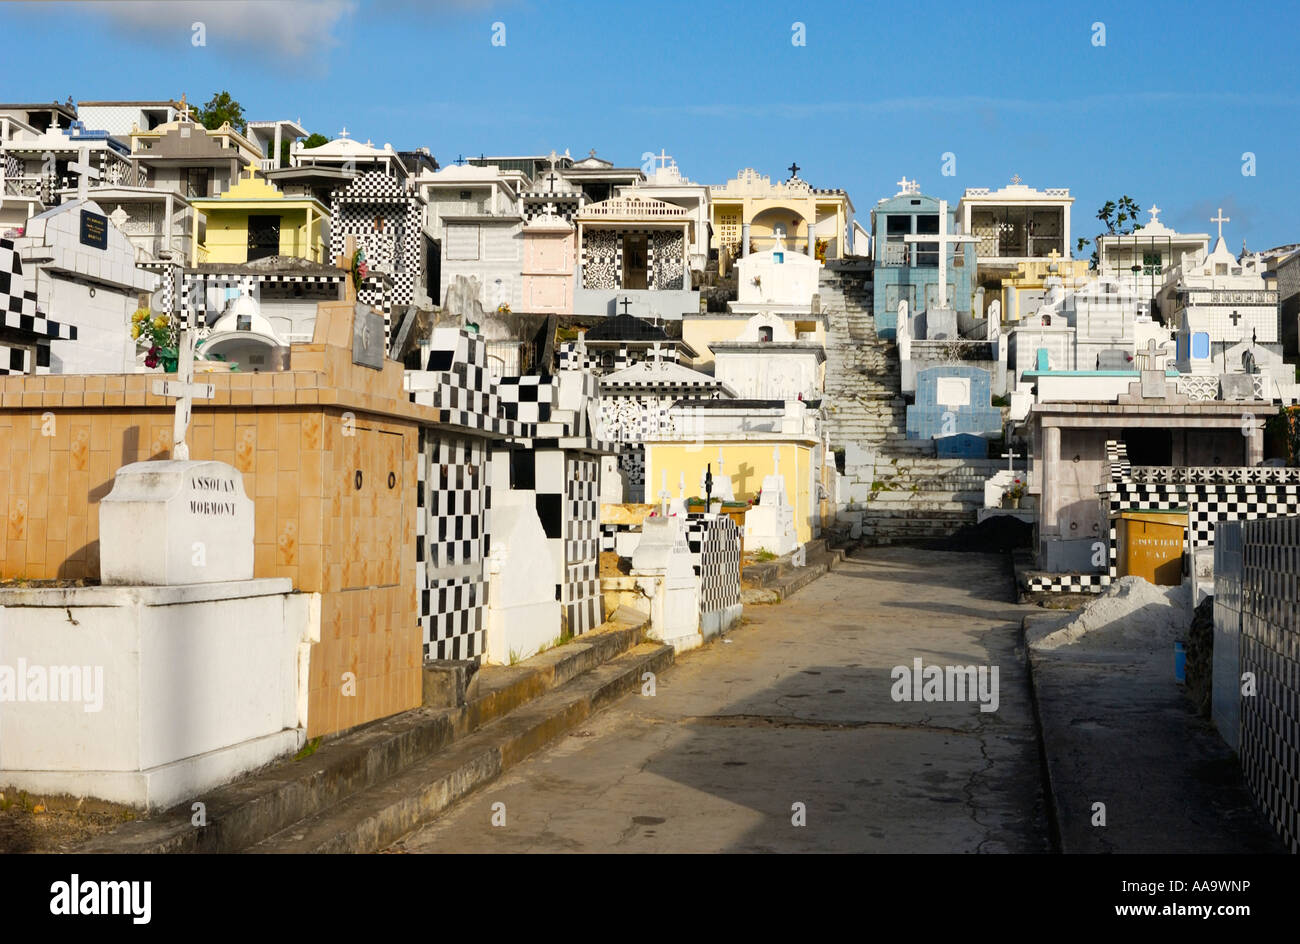 The Cemetery of Morne-a-L'Eau, Guadeloupe FR Stock Photo